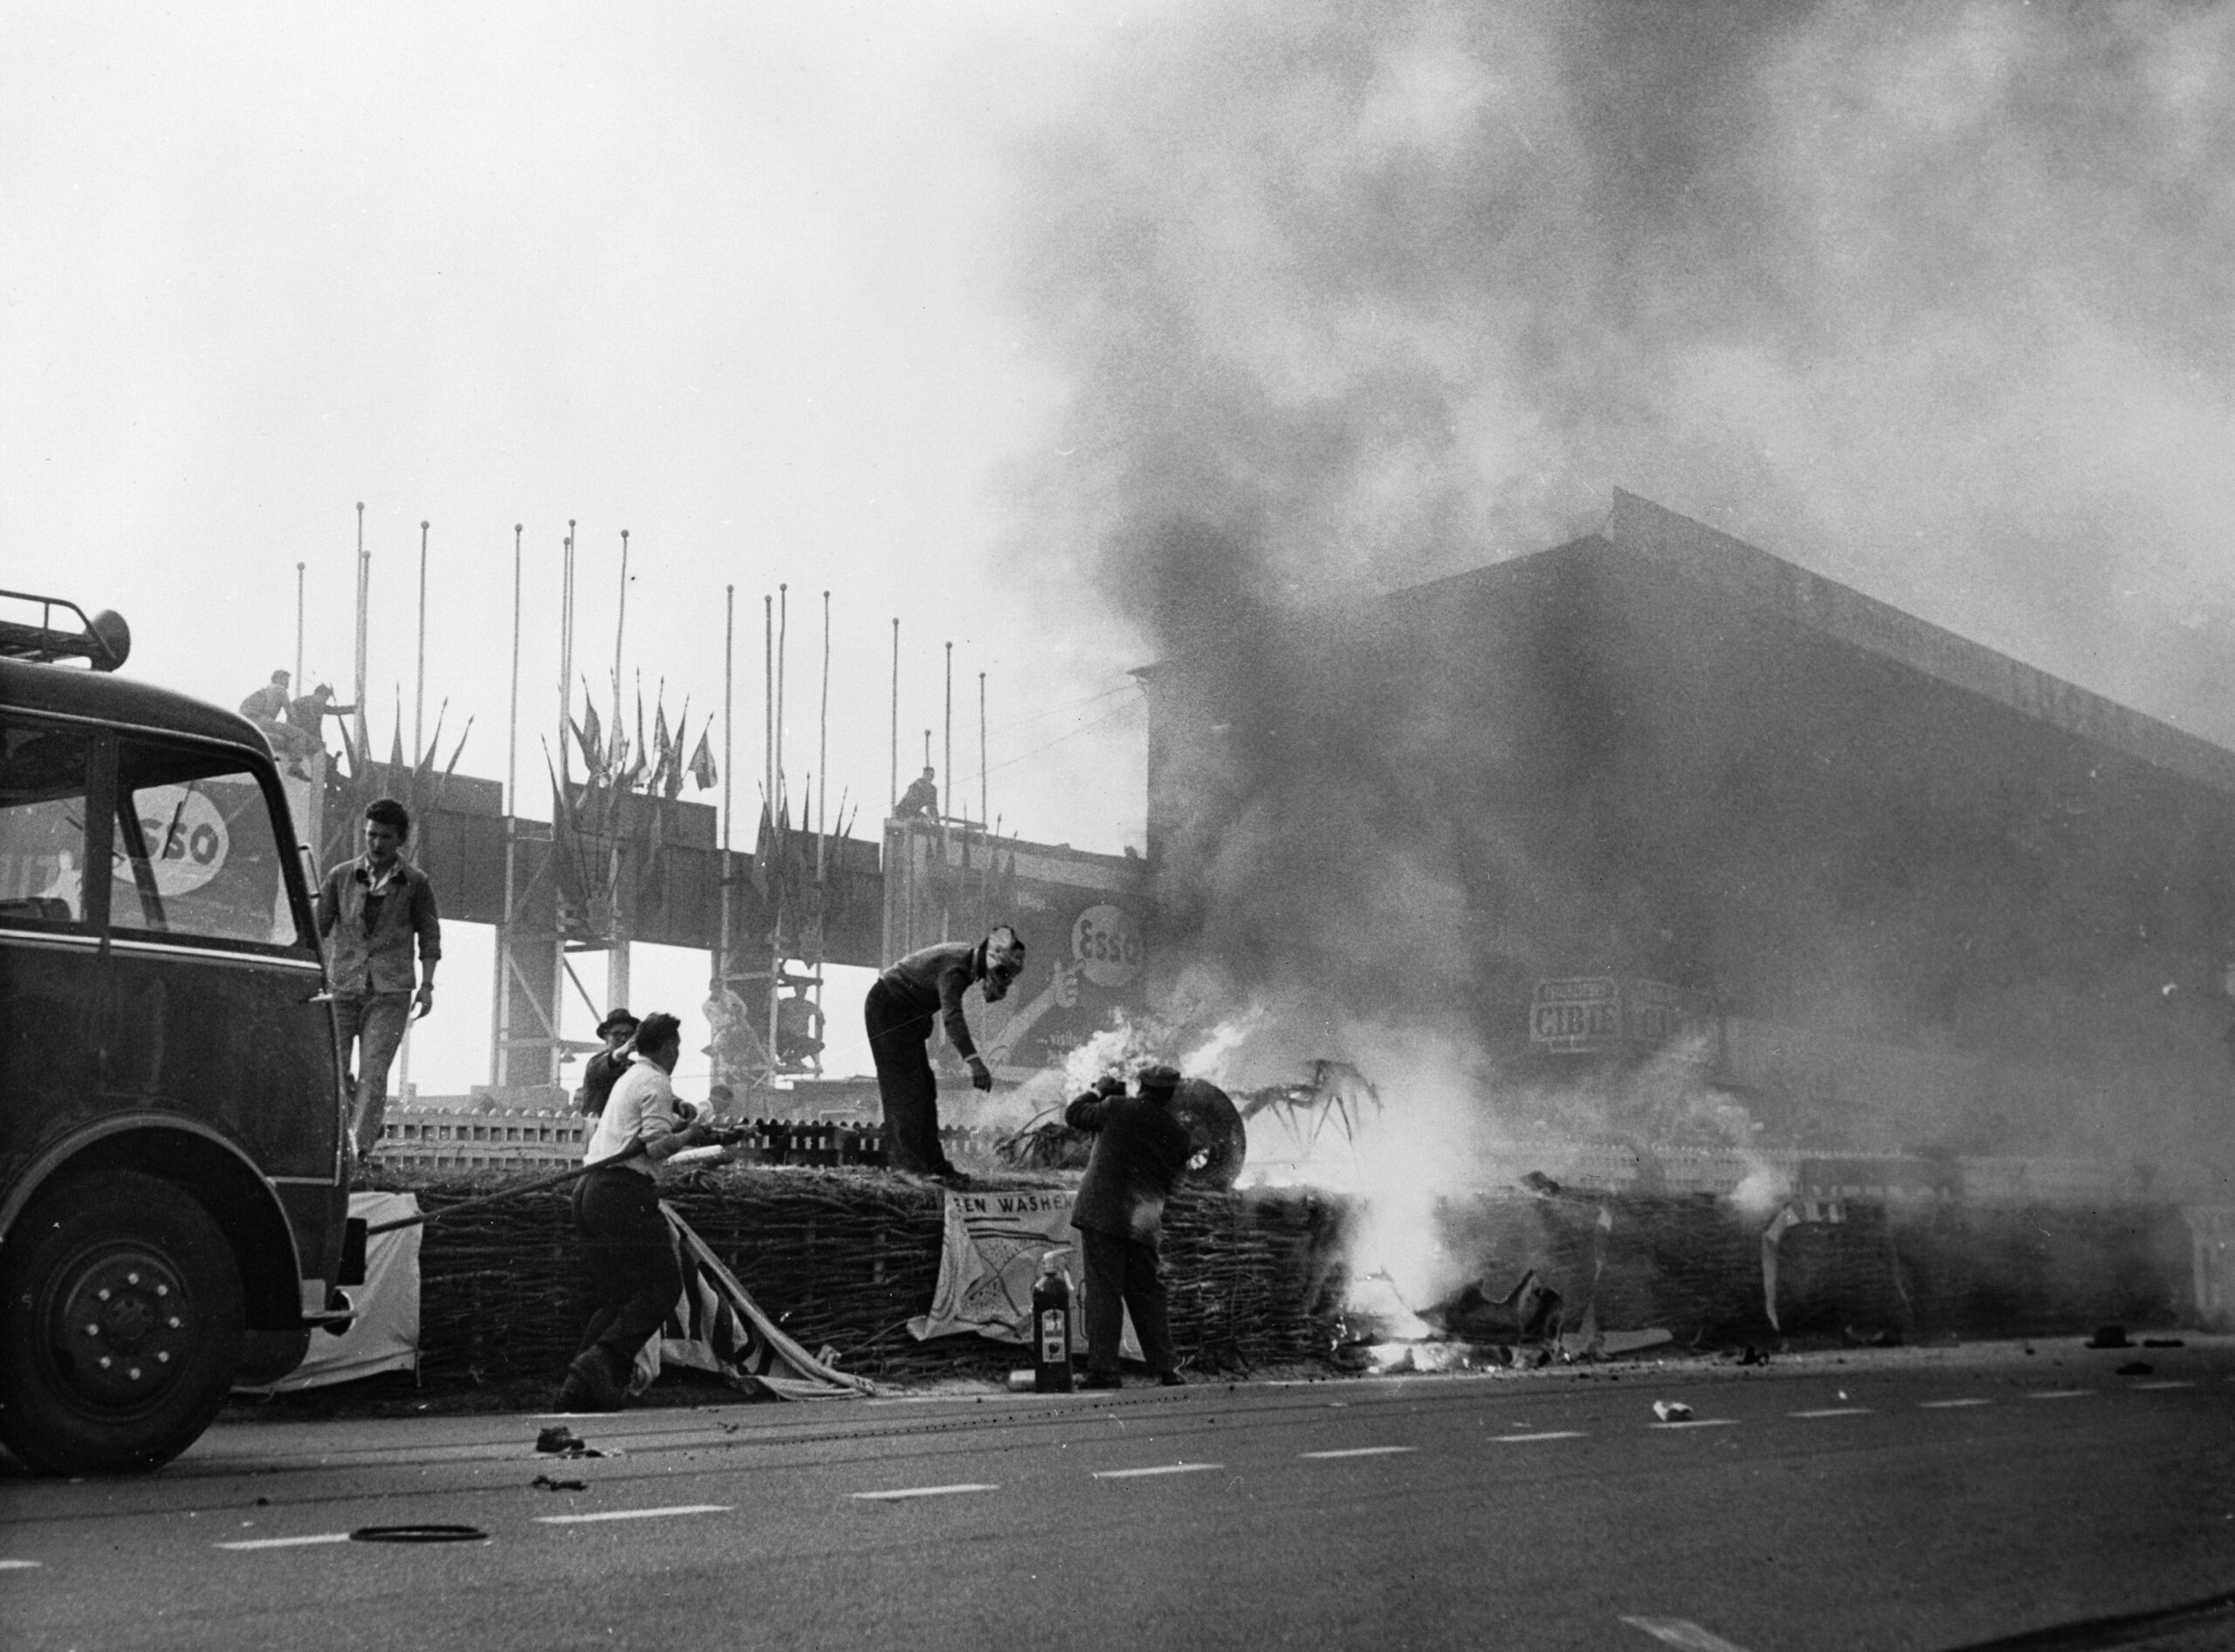 Firemen Putting Out a Fire at Le Mans in 1955 following Pierre Levagh's disastrous crash